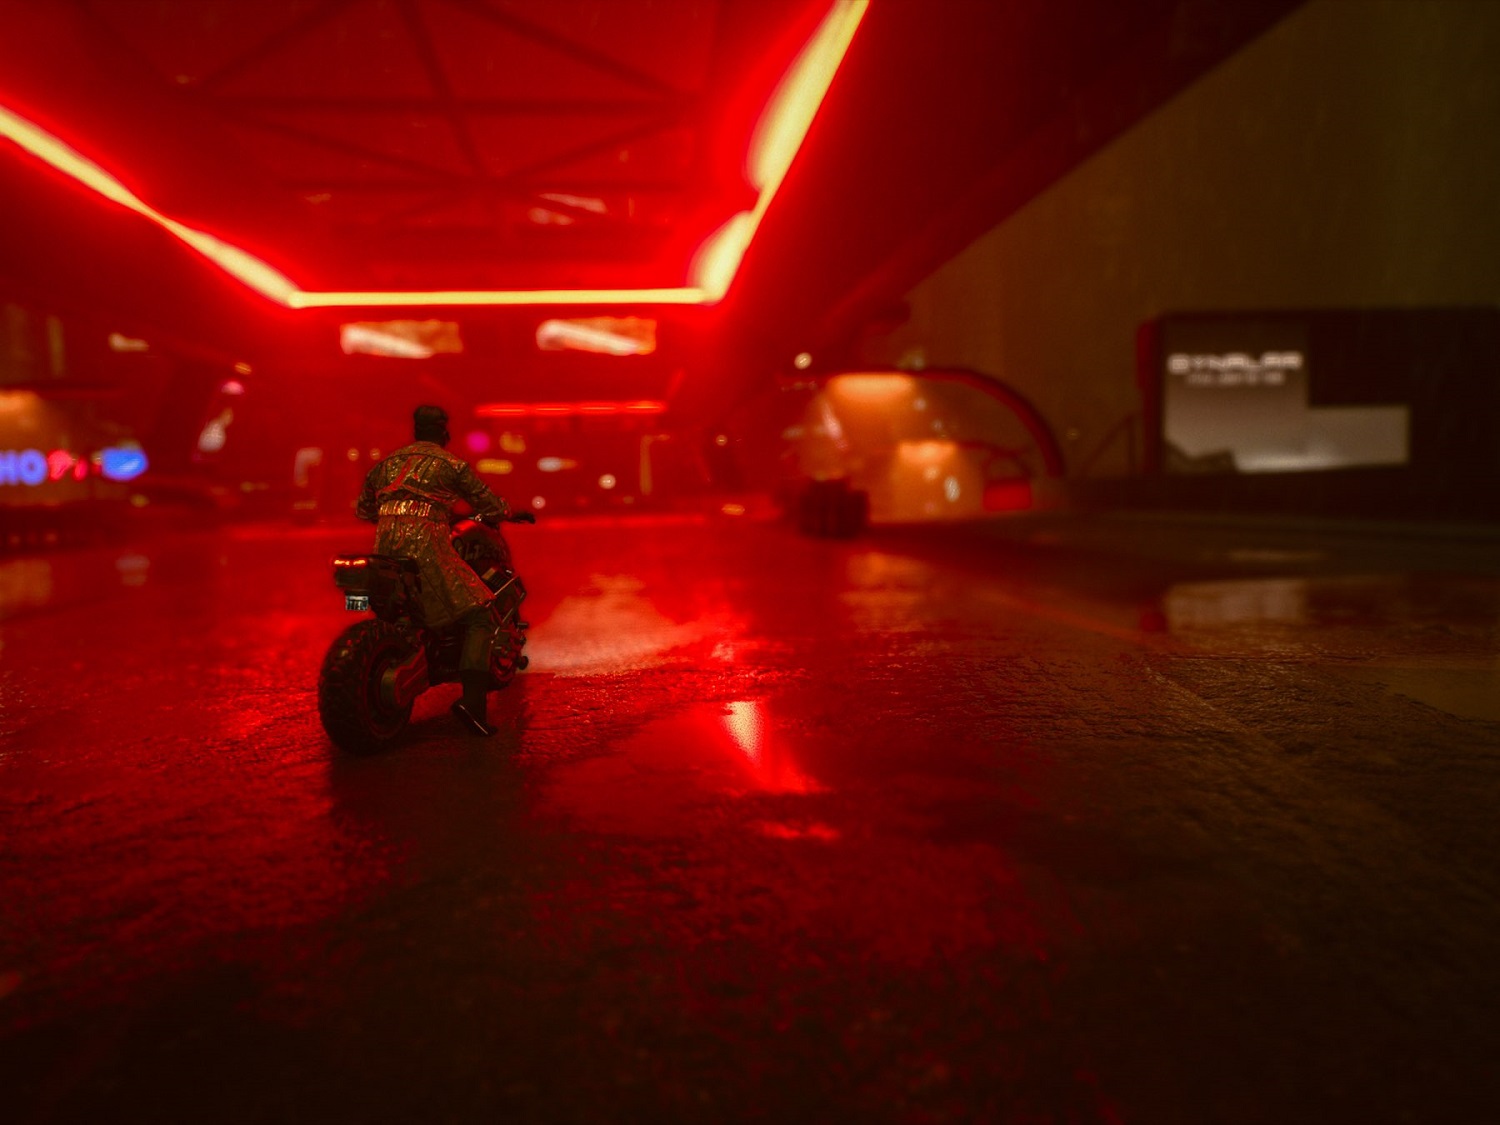 In game photography from Cyberpunk 2077 by Sam Horine. a red background with a motorcycle in front